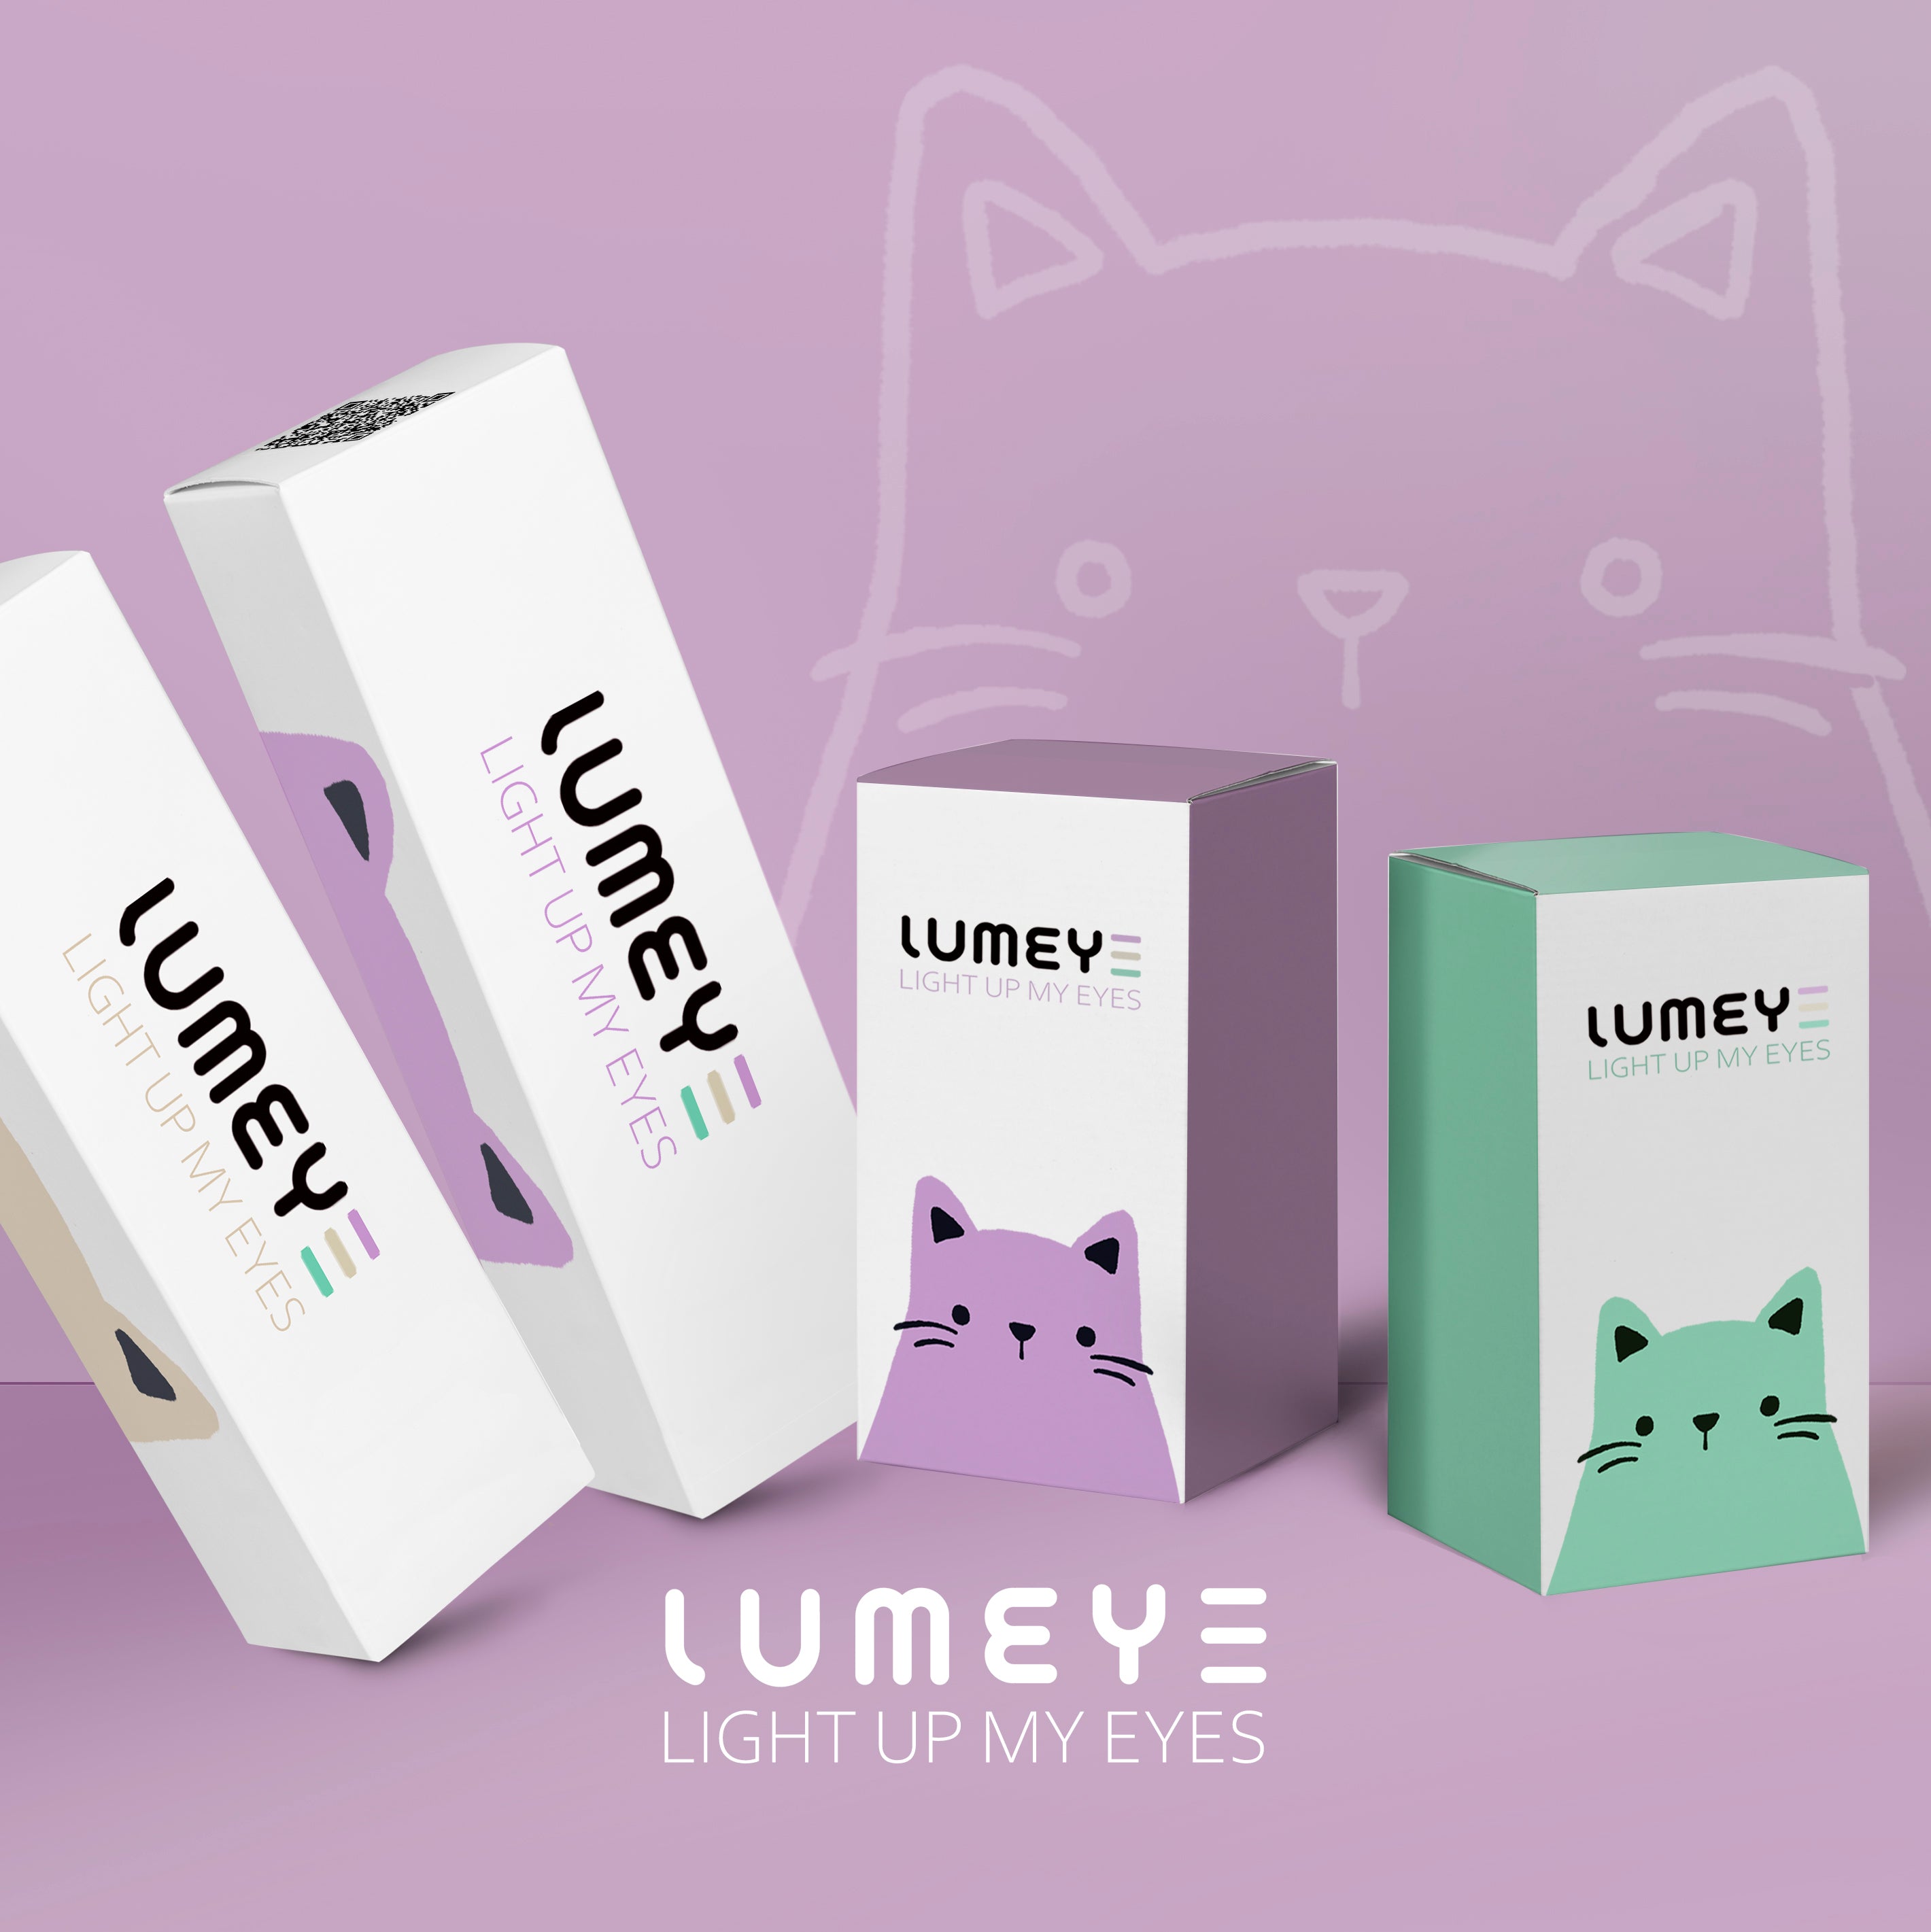 Best COLORED CONTACTS - LUMEYE Dreamy Galaxy Gray Colored Contact Lenses - LUMEYE